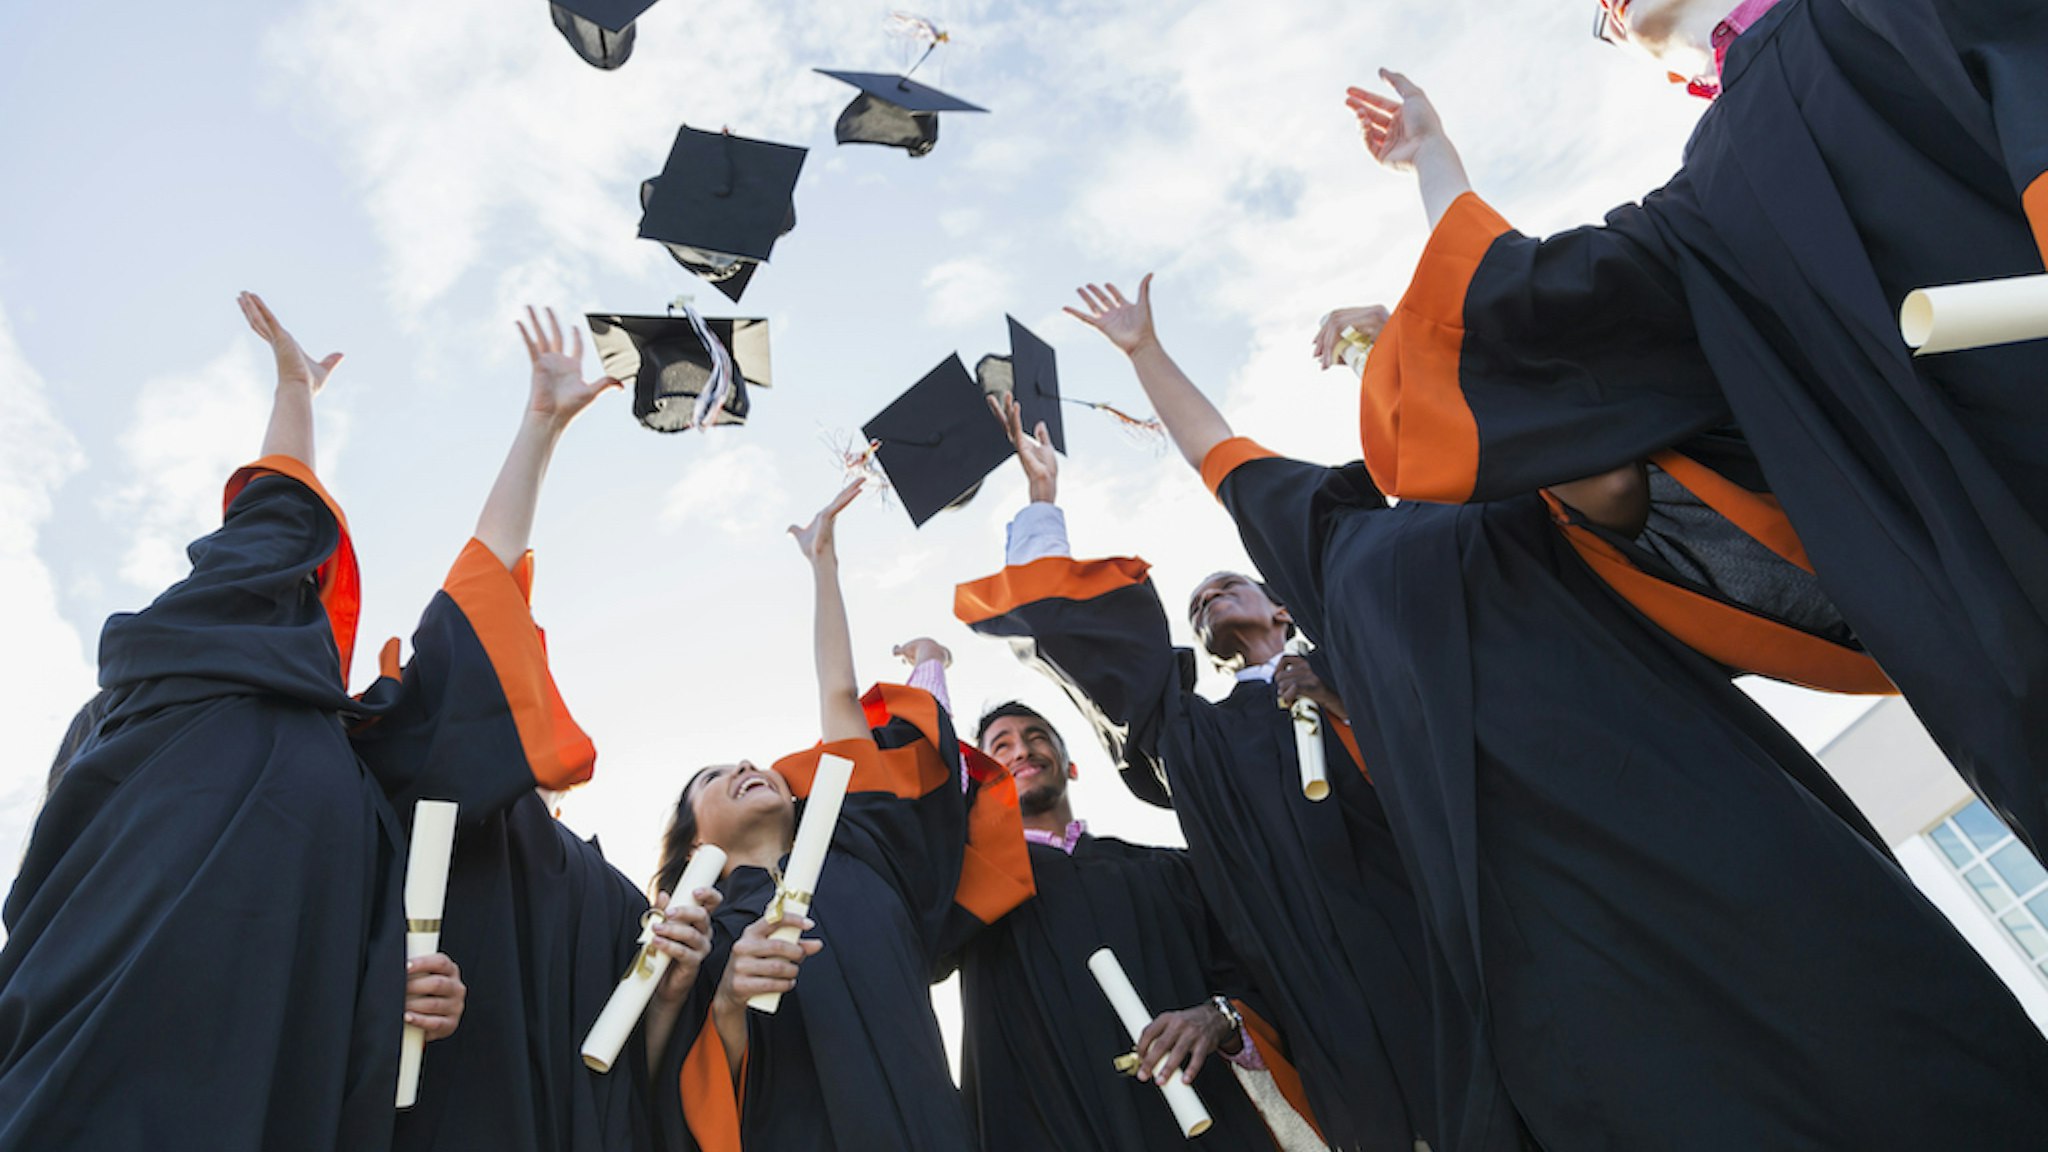 A group of seven multi-ethnic high school or university graduates wearing graduation gowns, holding diplomas. Throwing their caps in the air.